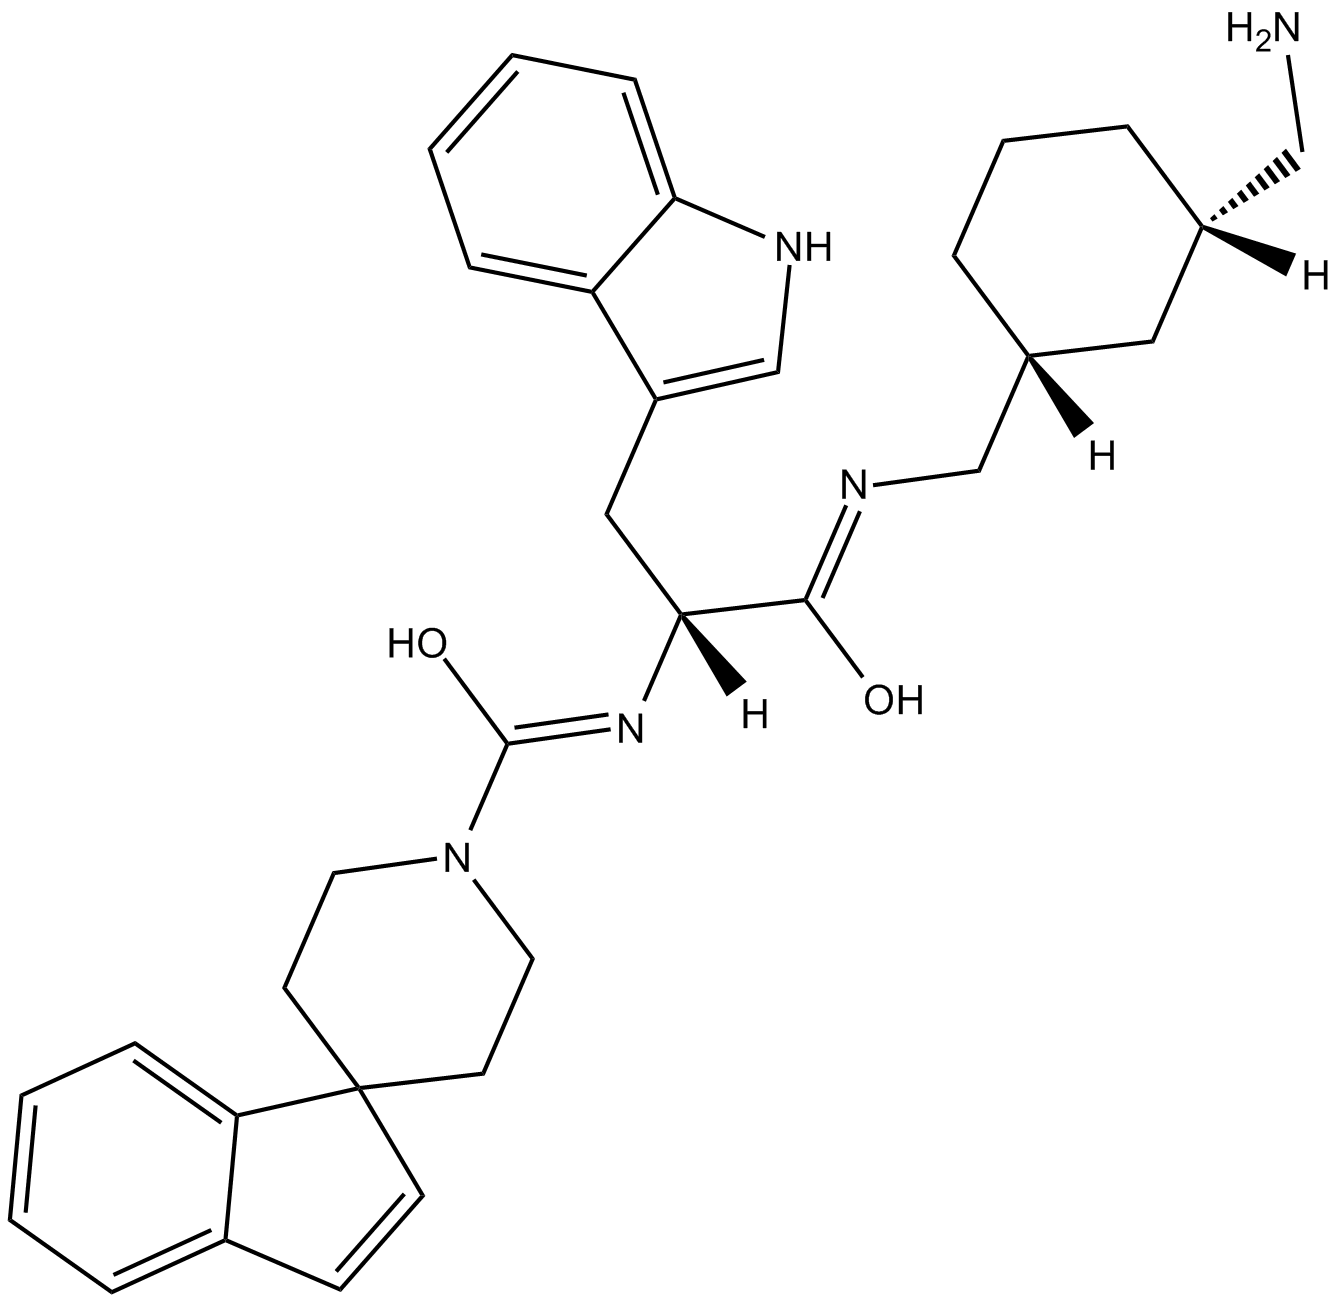 (1R,1'S,3'R/1R,1'R,3'S)-L-054,264  Chemical Structure